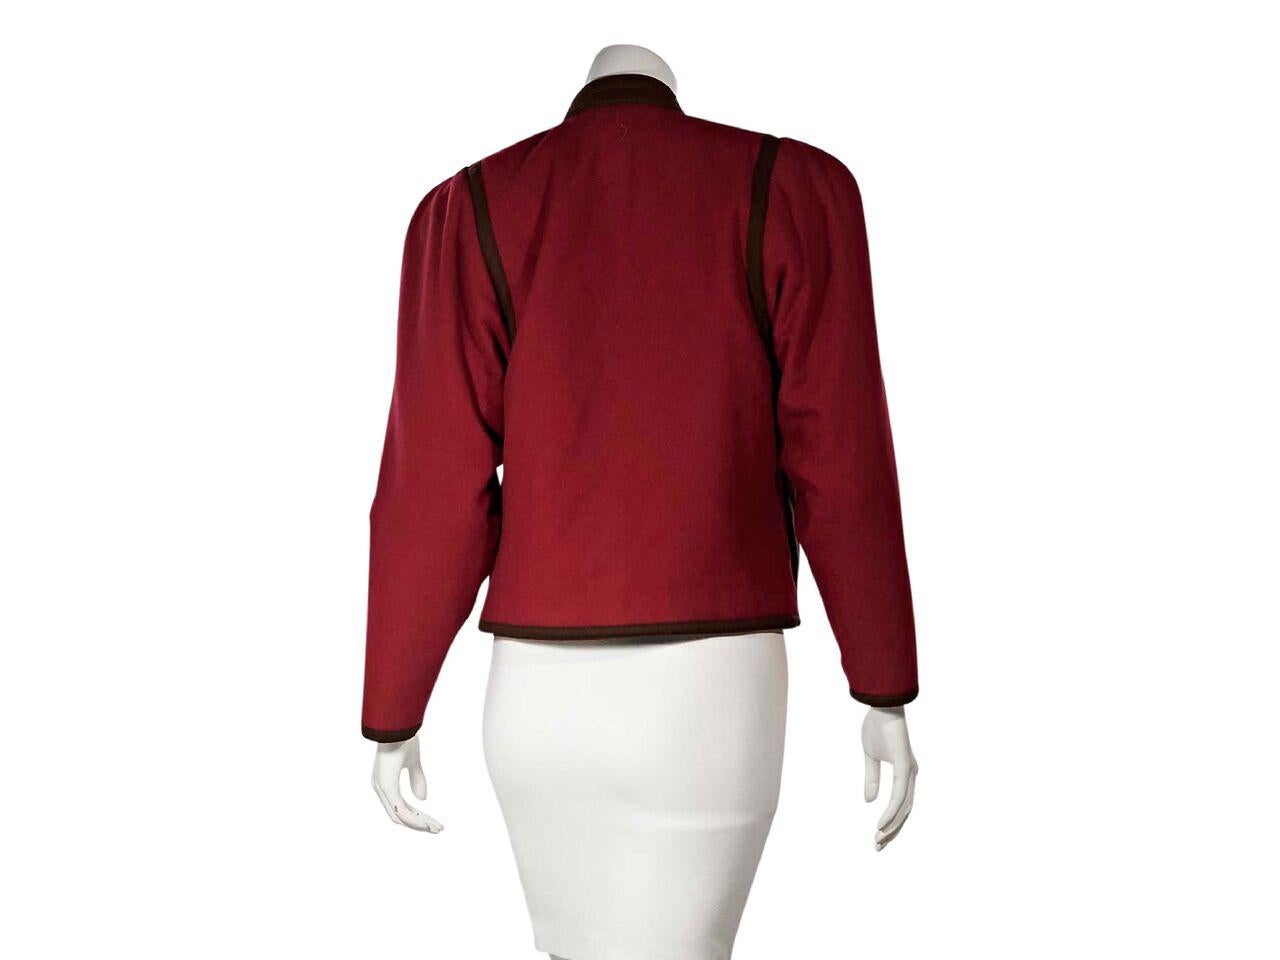 Product details:  Red and brown layered jacket by Gianni Versace.  Stand collar.  Long sleeves.  Concealed button-front closure.  Waist slide pockets.  32